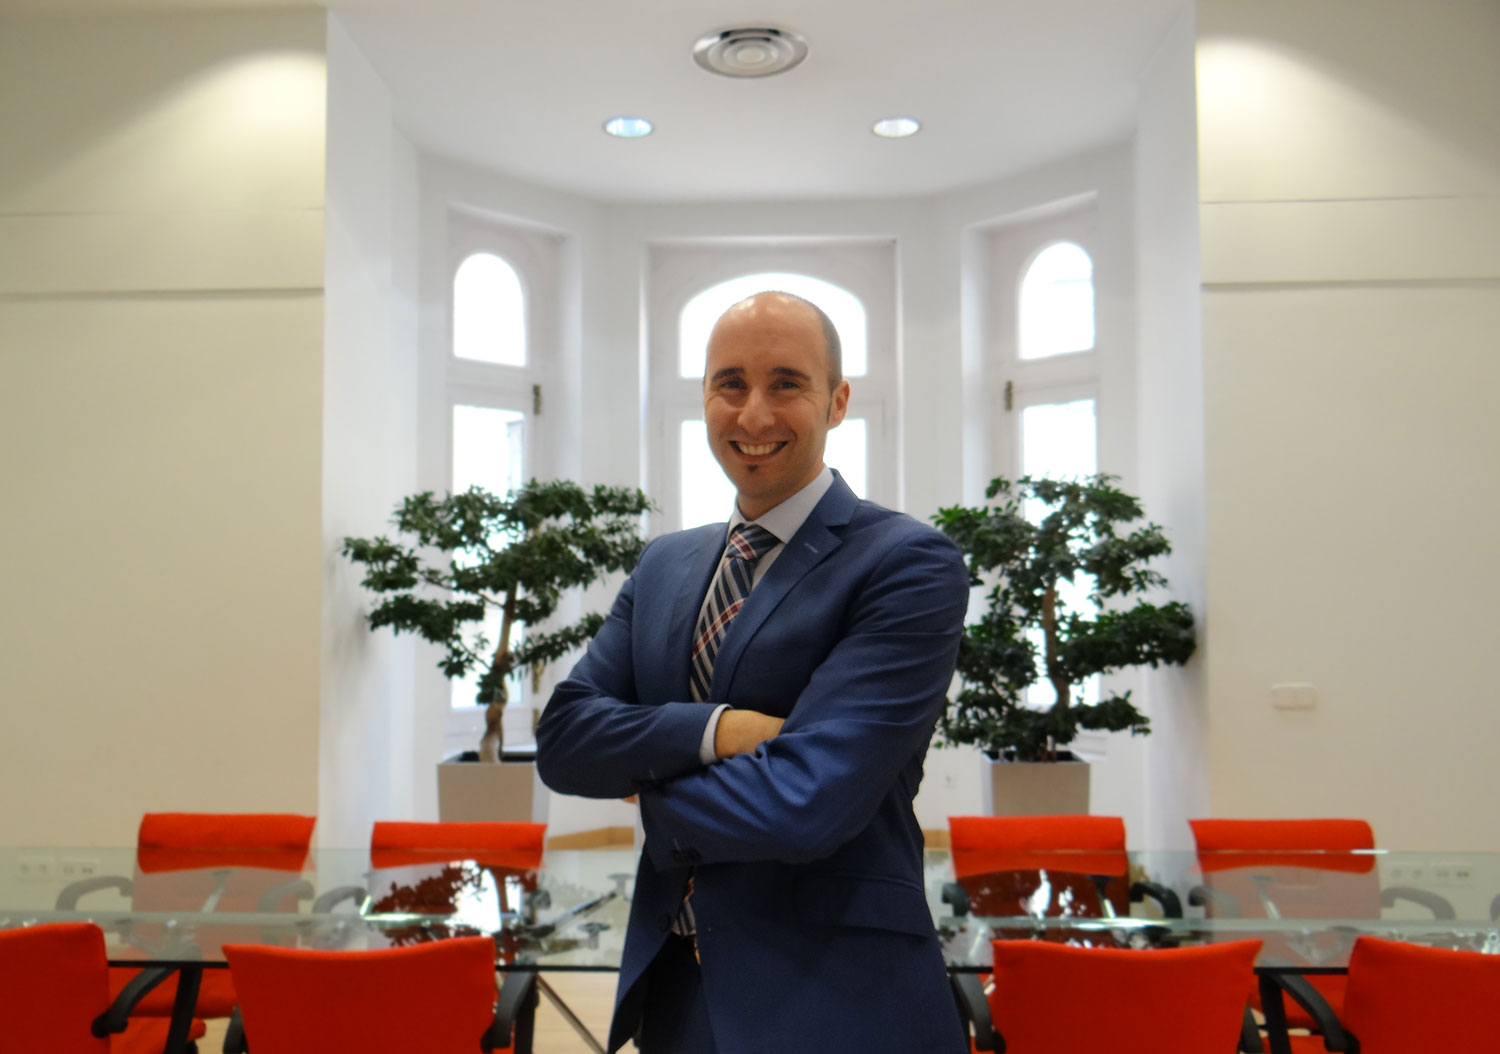 Joseba Villate, new director of the PONS IP Office in the Basque Country